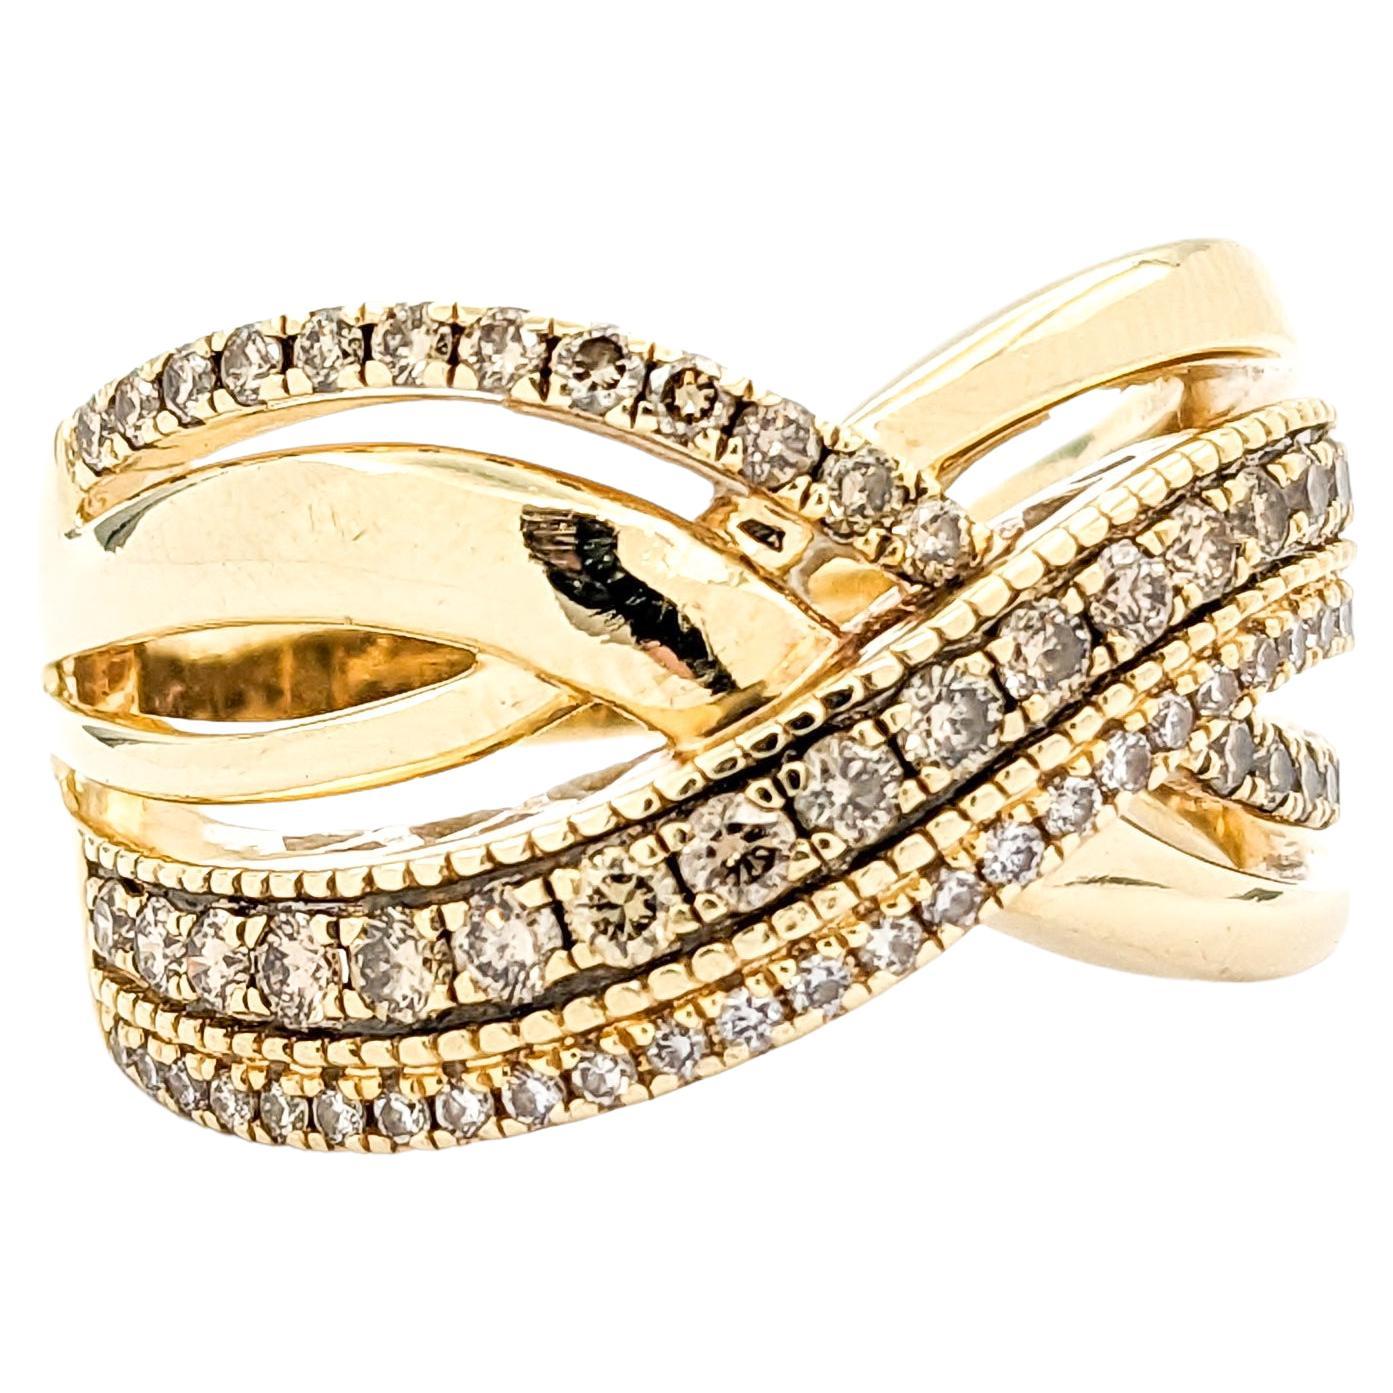 1ctw Diamond Ring In Yellow Gold For Sale